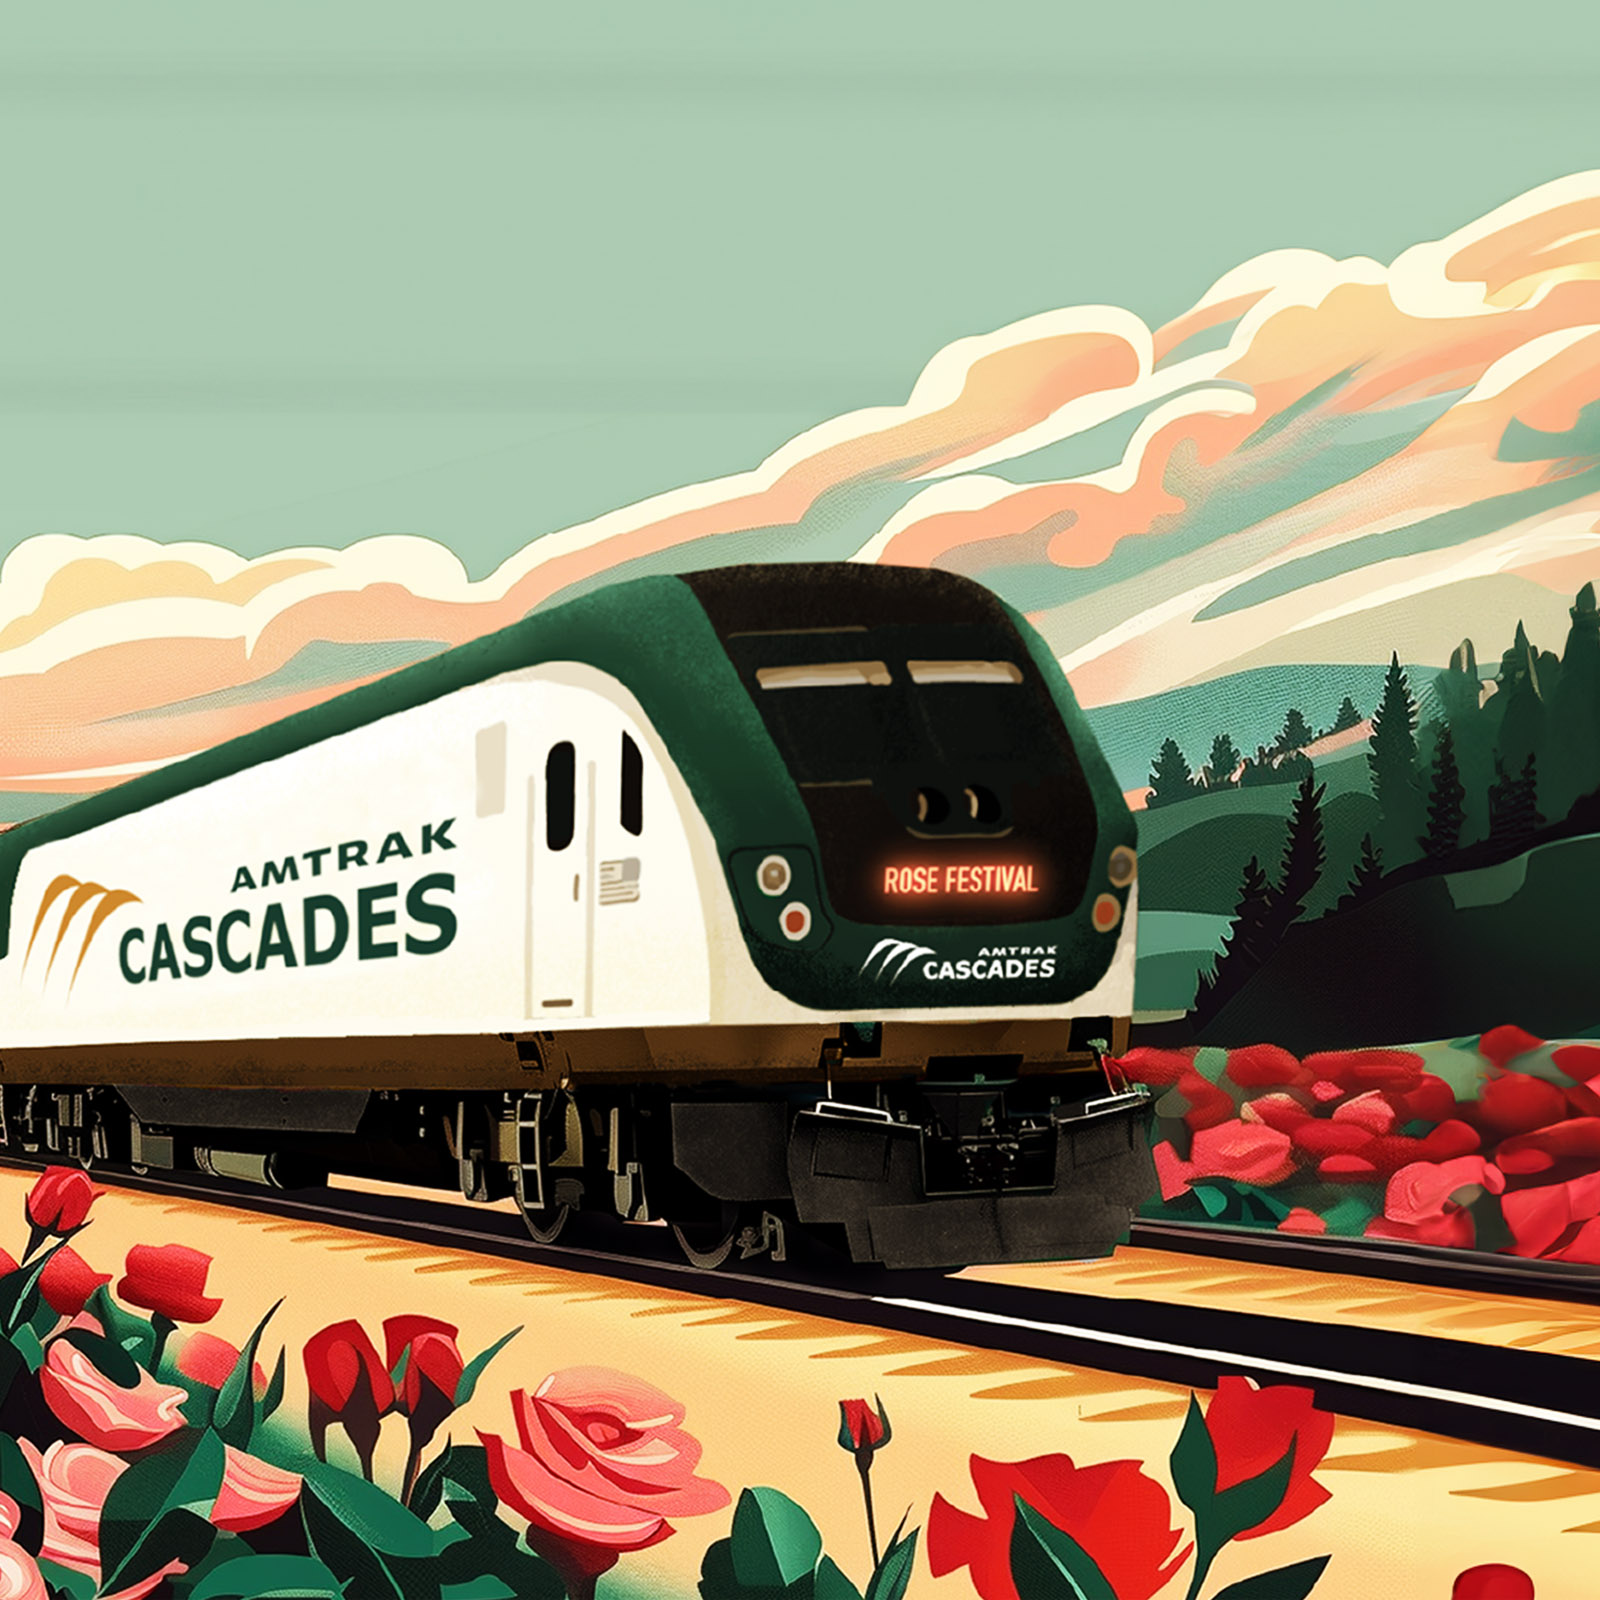 Illustration of an Amtrak Cascades train in a field of roses with 'Rose Festival' on the front